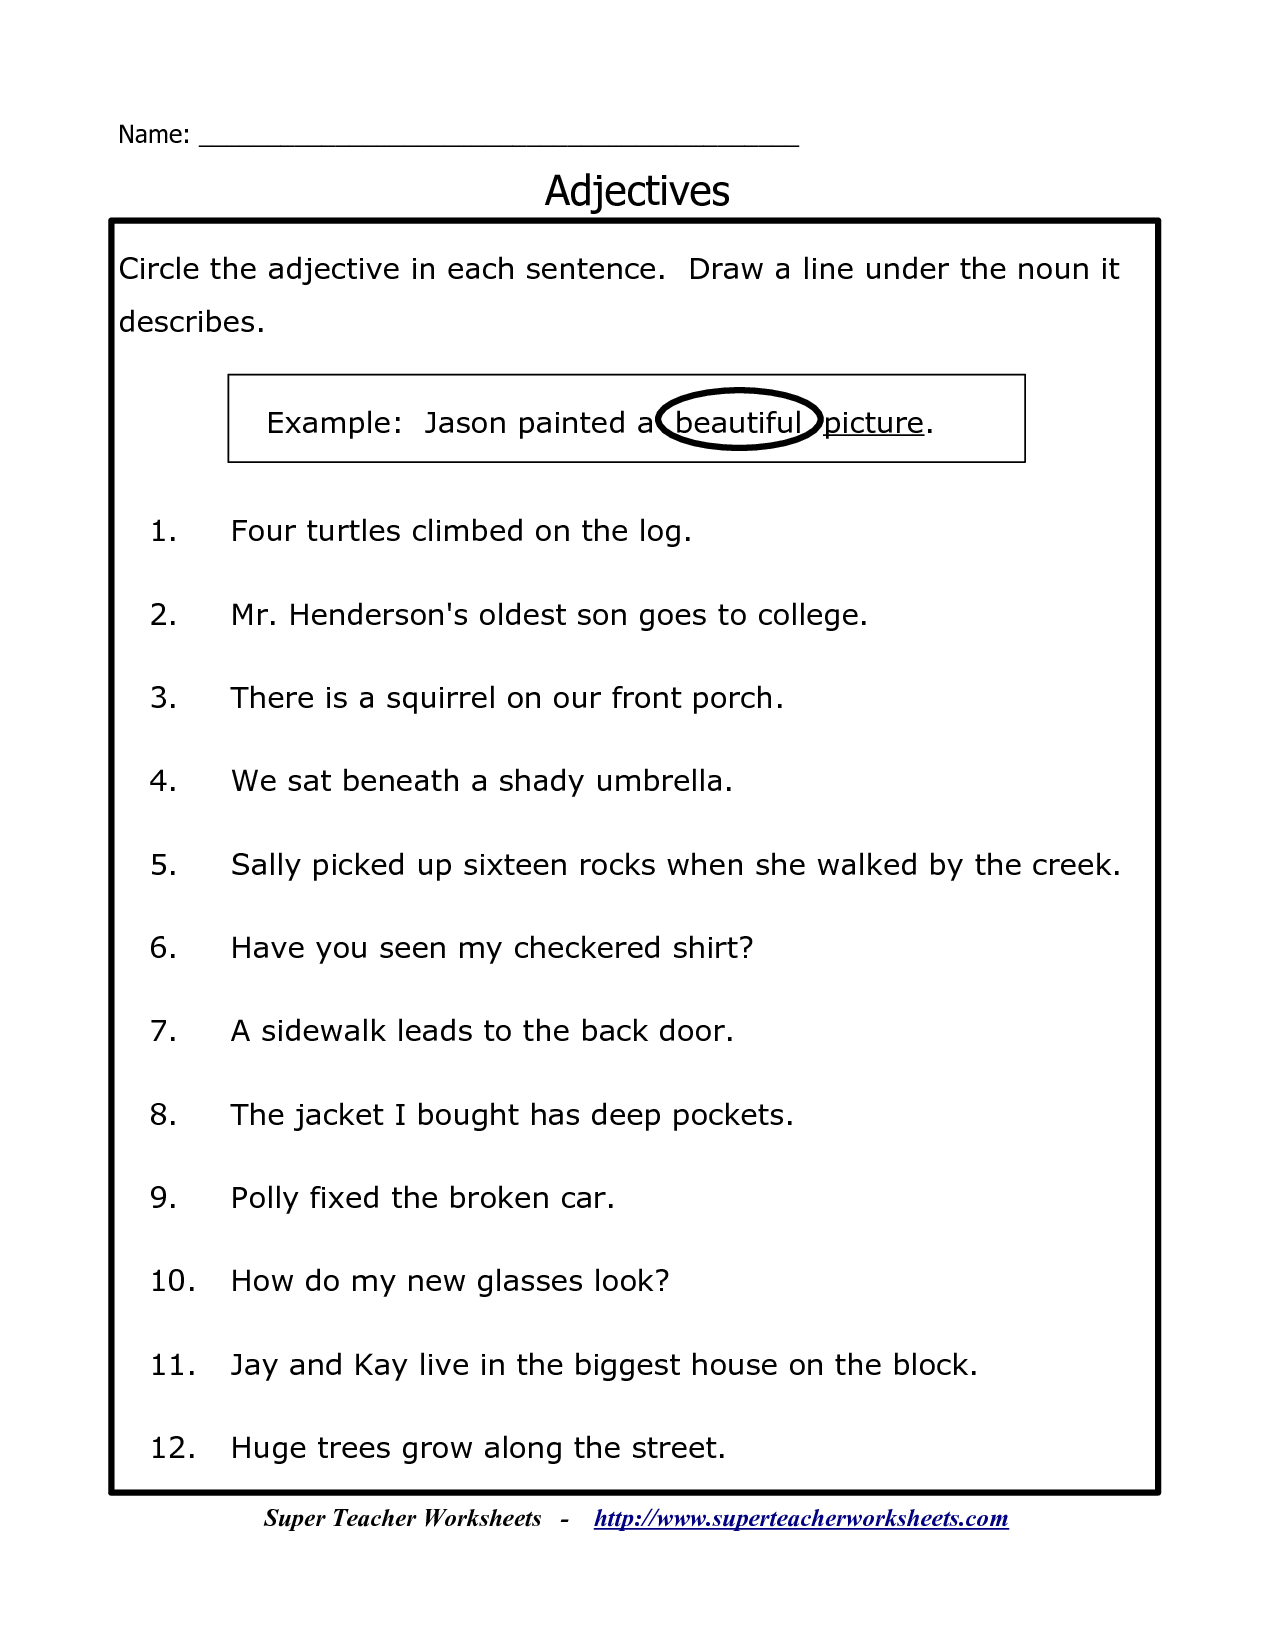 adjectives-and-nouns-worksheets-99worksheets